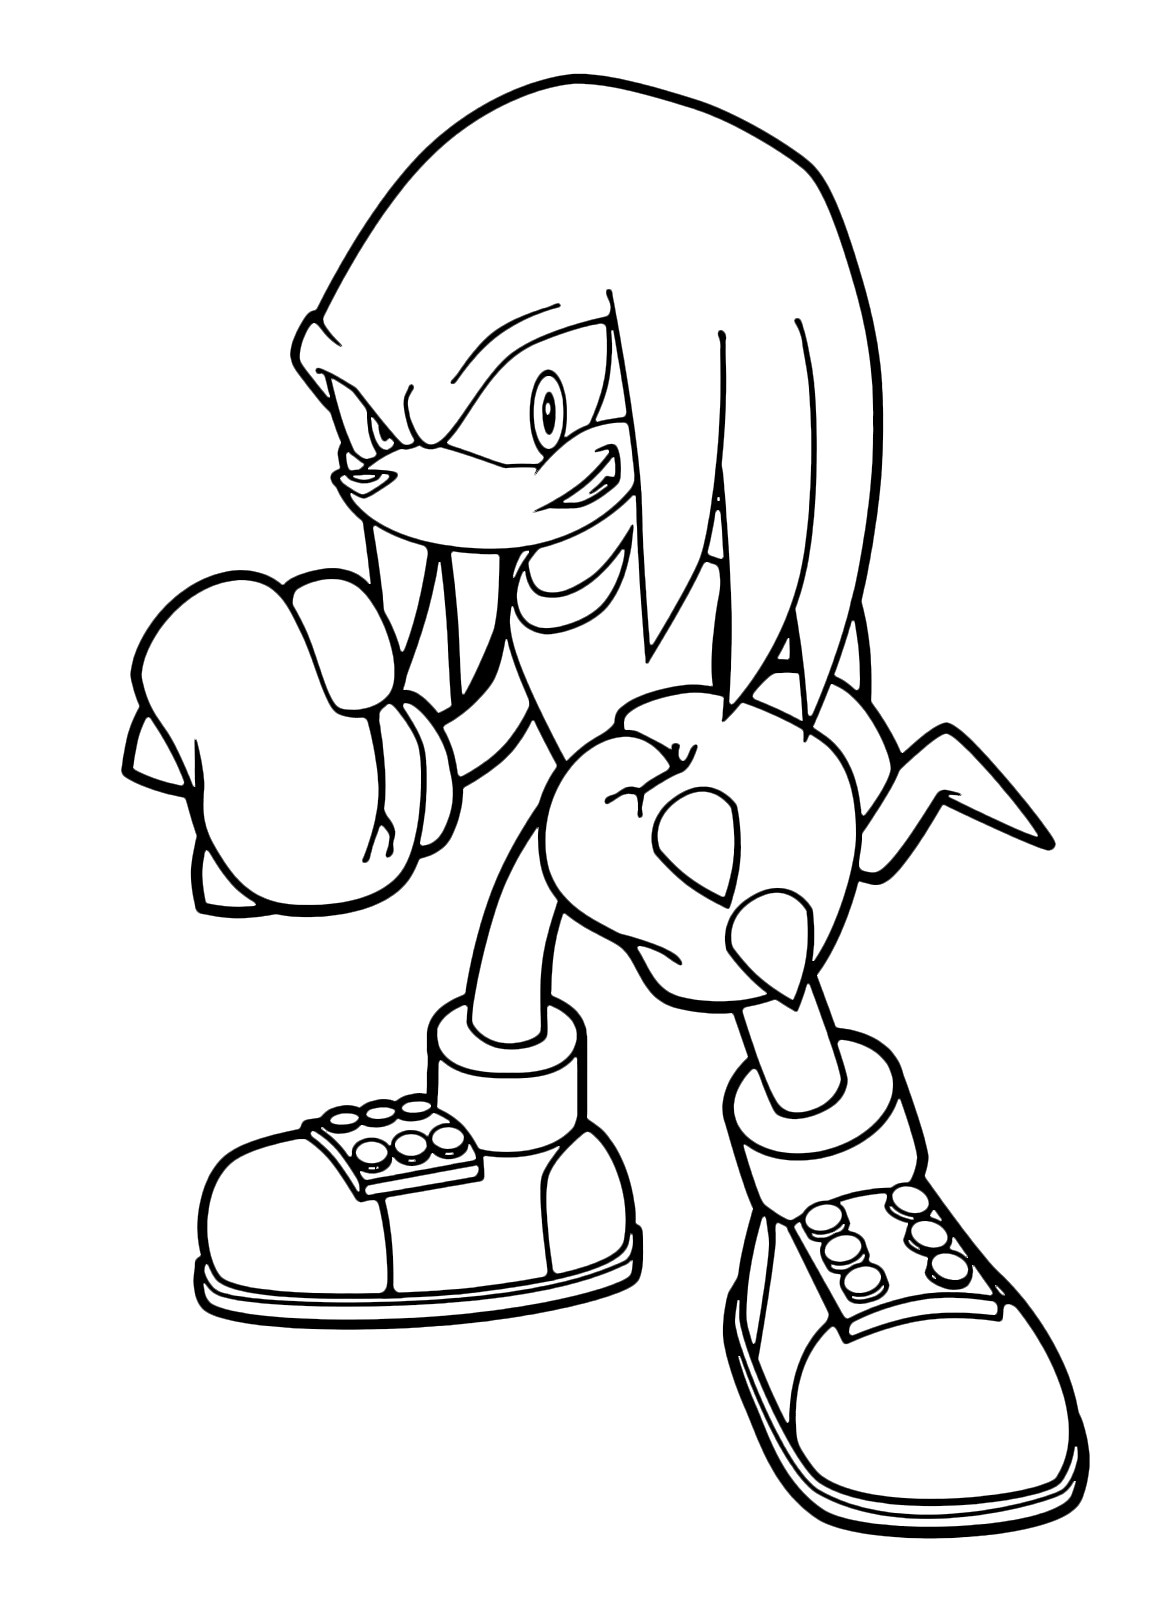 Knuckles The Echidna Smiling Coloring Page